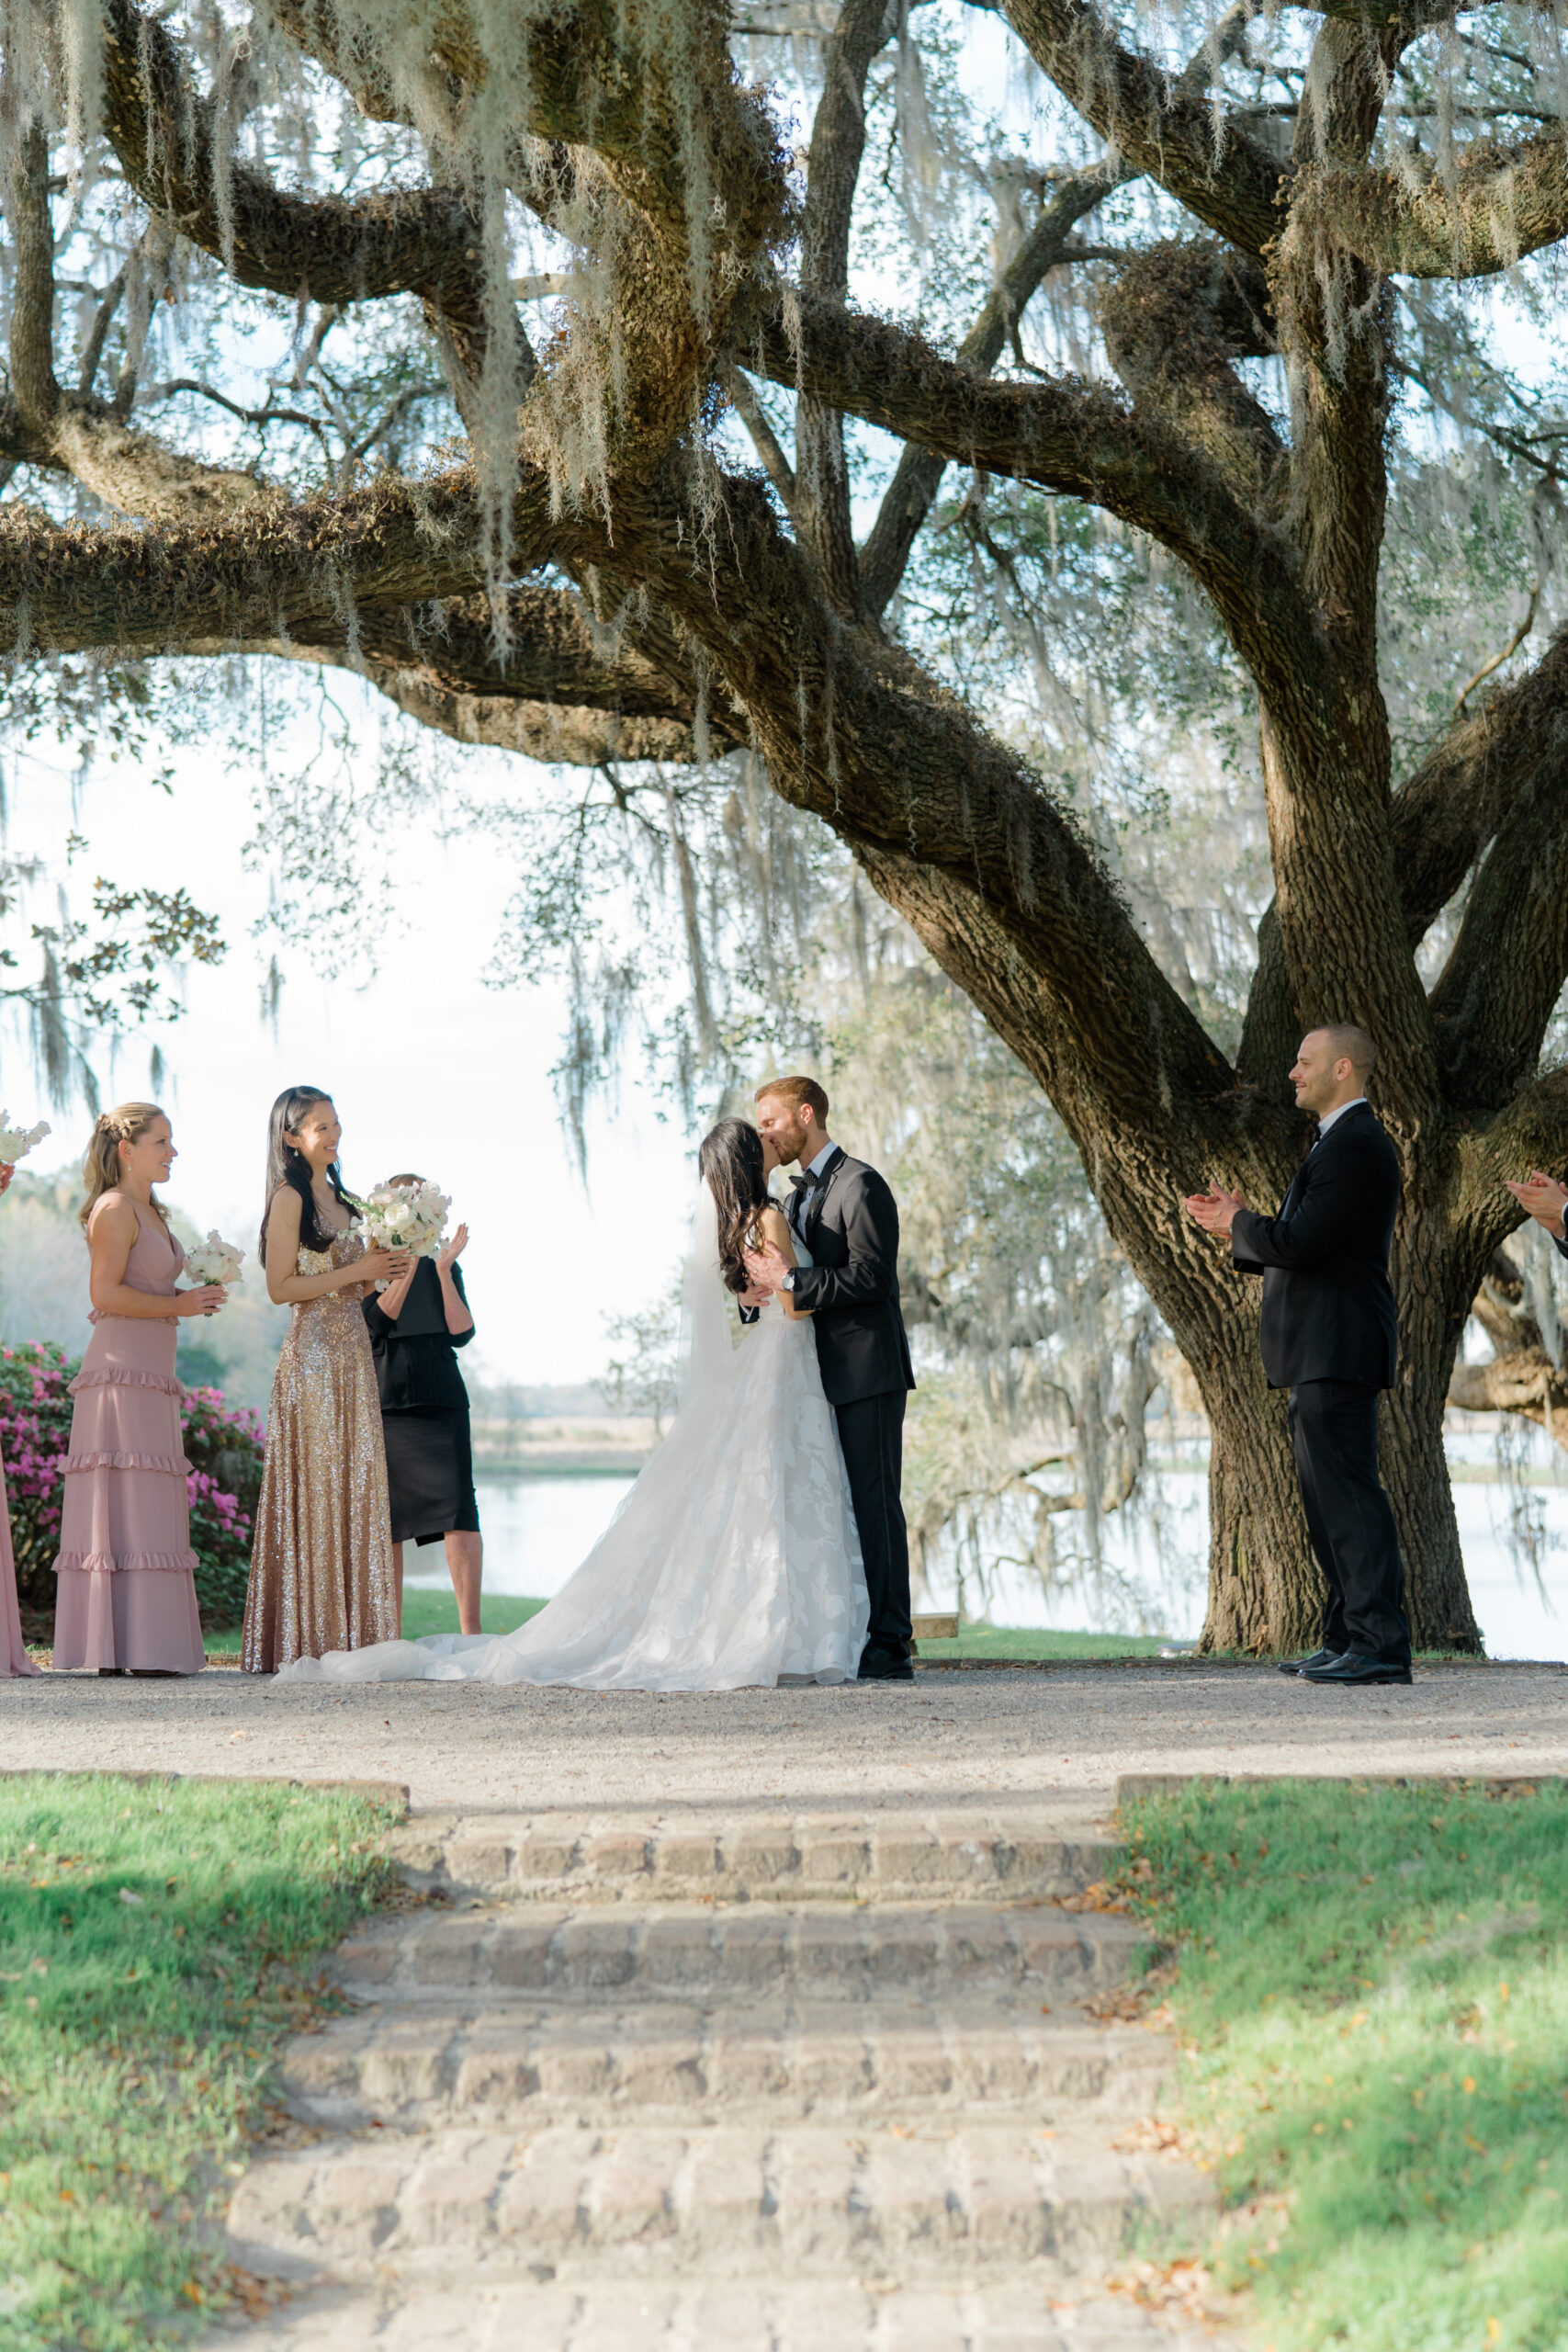 First kiss under the tree with spanish moss during wedding ceremony in the octogonal garden at Middleton Place. Bridal party clapping. Maid of honor in shimmering gold dress. 